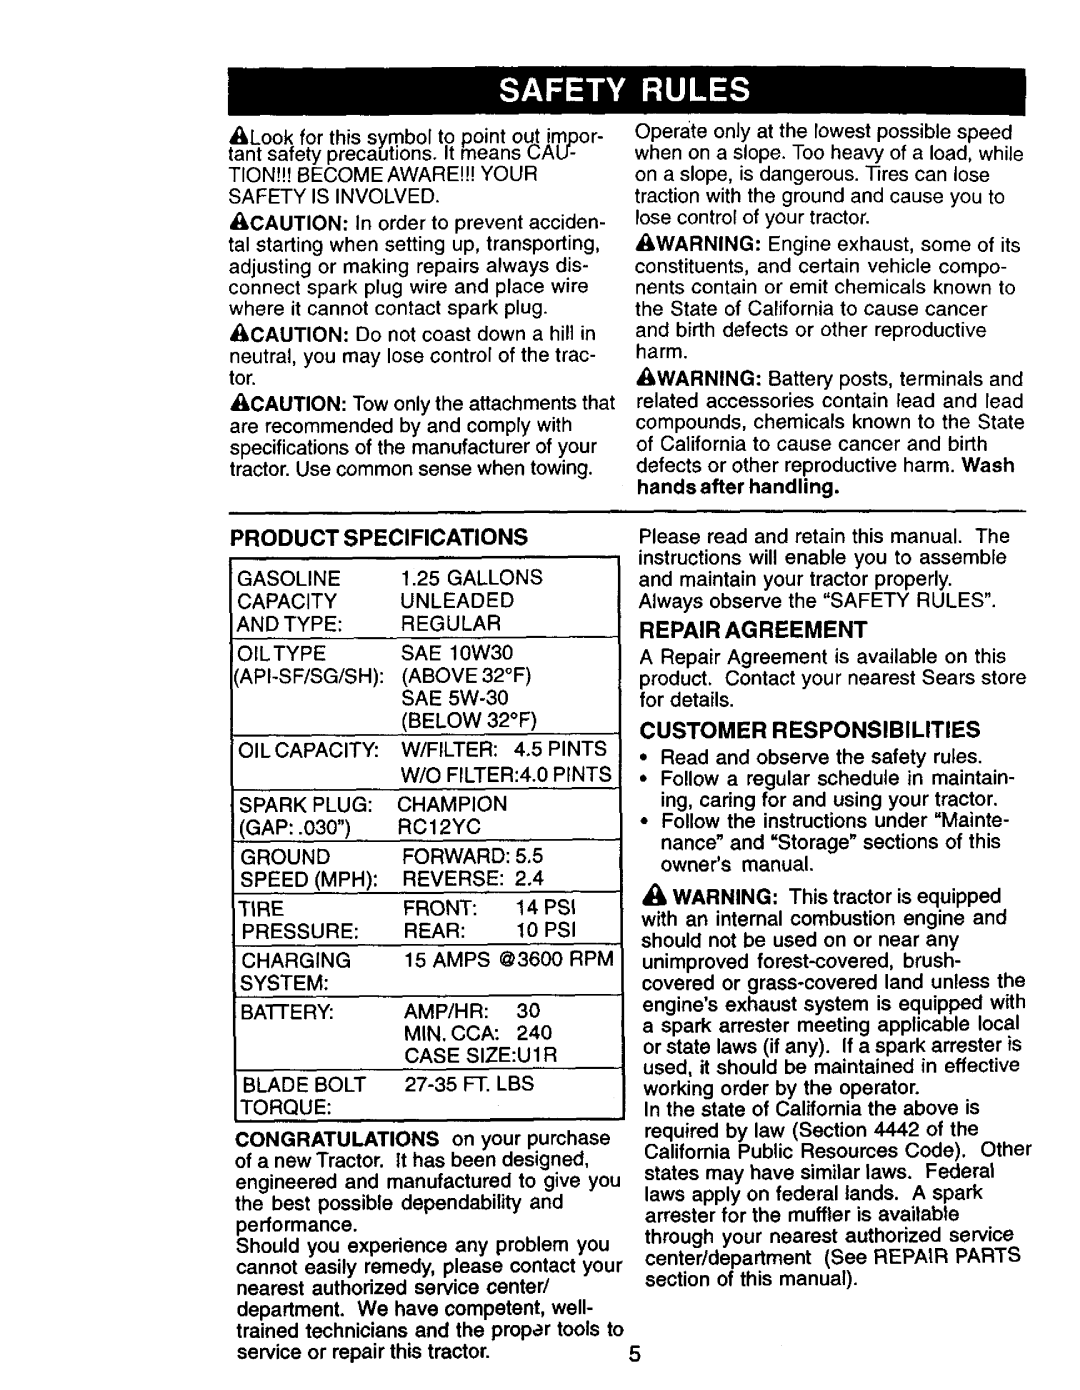 Craftsman 917.271142 manual Product Specifications, Customer Responsibilities 